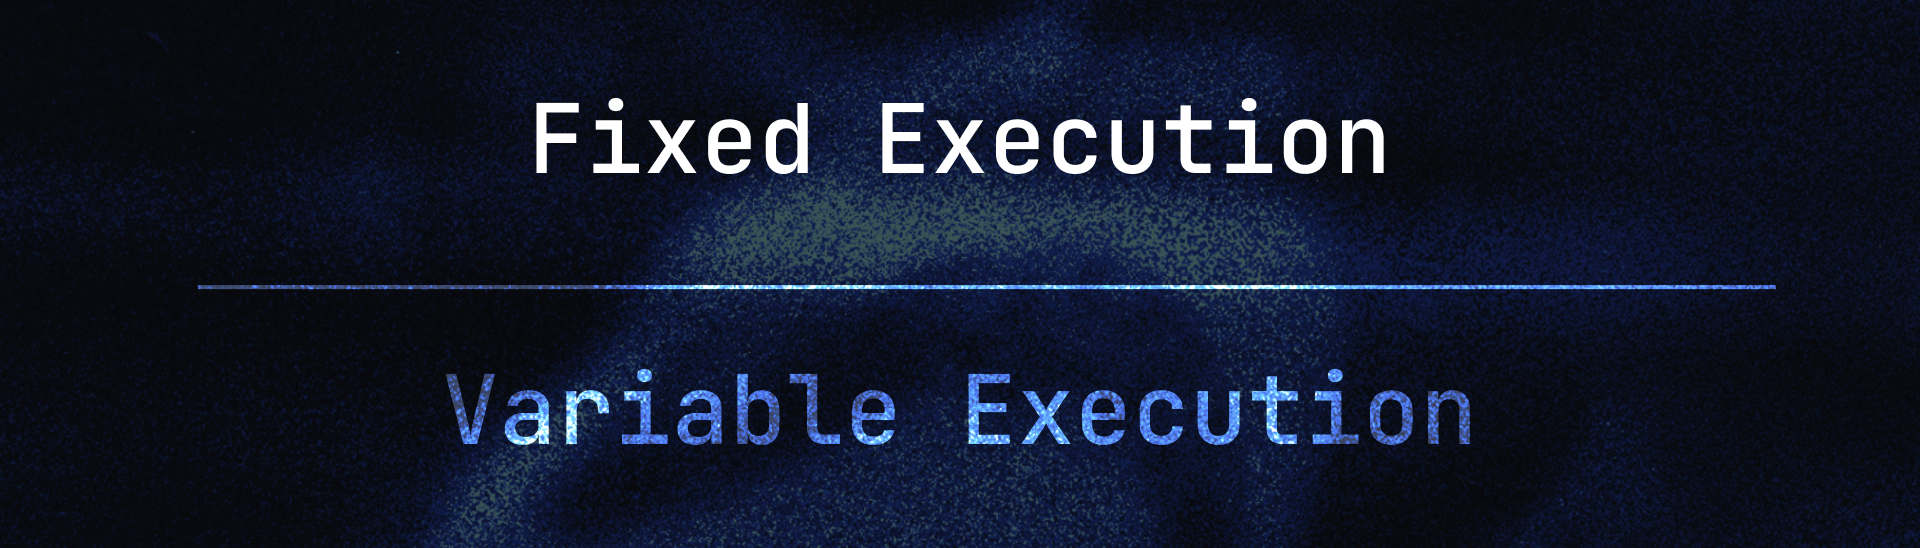 Market Swaps = Variable Execution; Limit Swaps = Fixed Execution